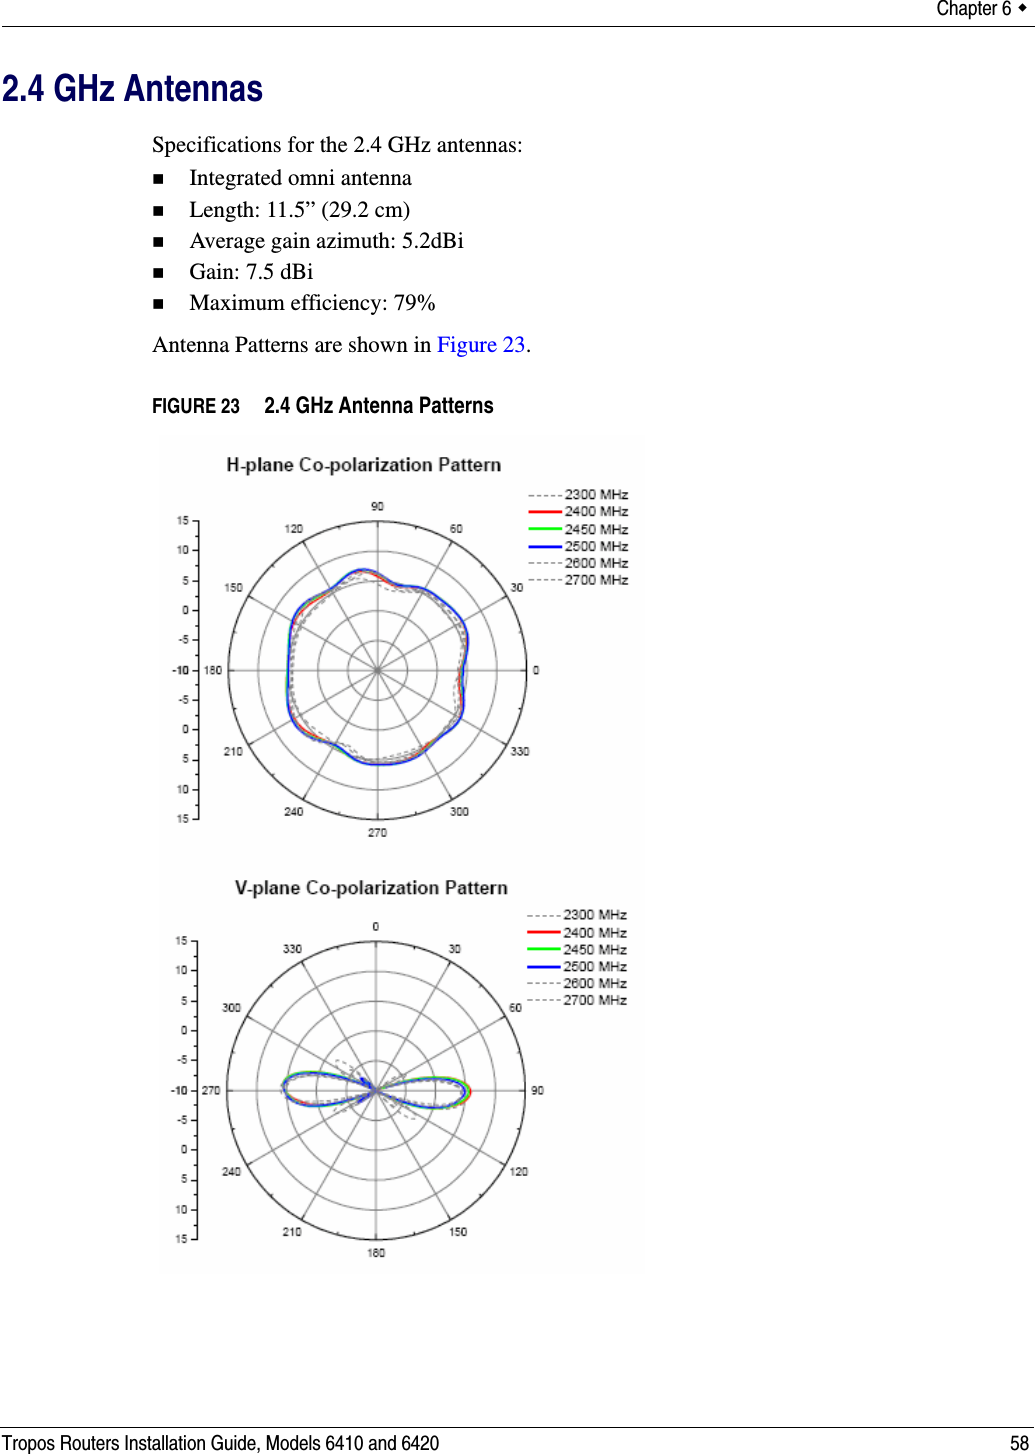 Chapter 6  Tropos Routers Installation Guide, Models 6410 and 6420 582.4 GHz AntennasSpecifications for the 2.4 GHz antennas:Integrated omni antennaLength: 11.5” (29.2 cm)Average gain azimuth: 5.2dBiGain: 7.5 dBiMaximum efficiency: 79% Antenna Patterns are shown in Figure 23.FIGURE 23   2.4 GHz Antenna Patterns